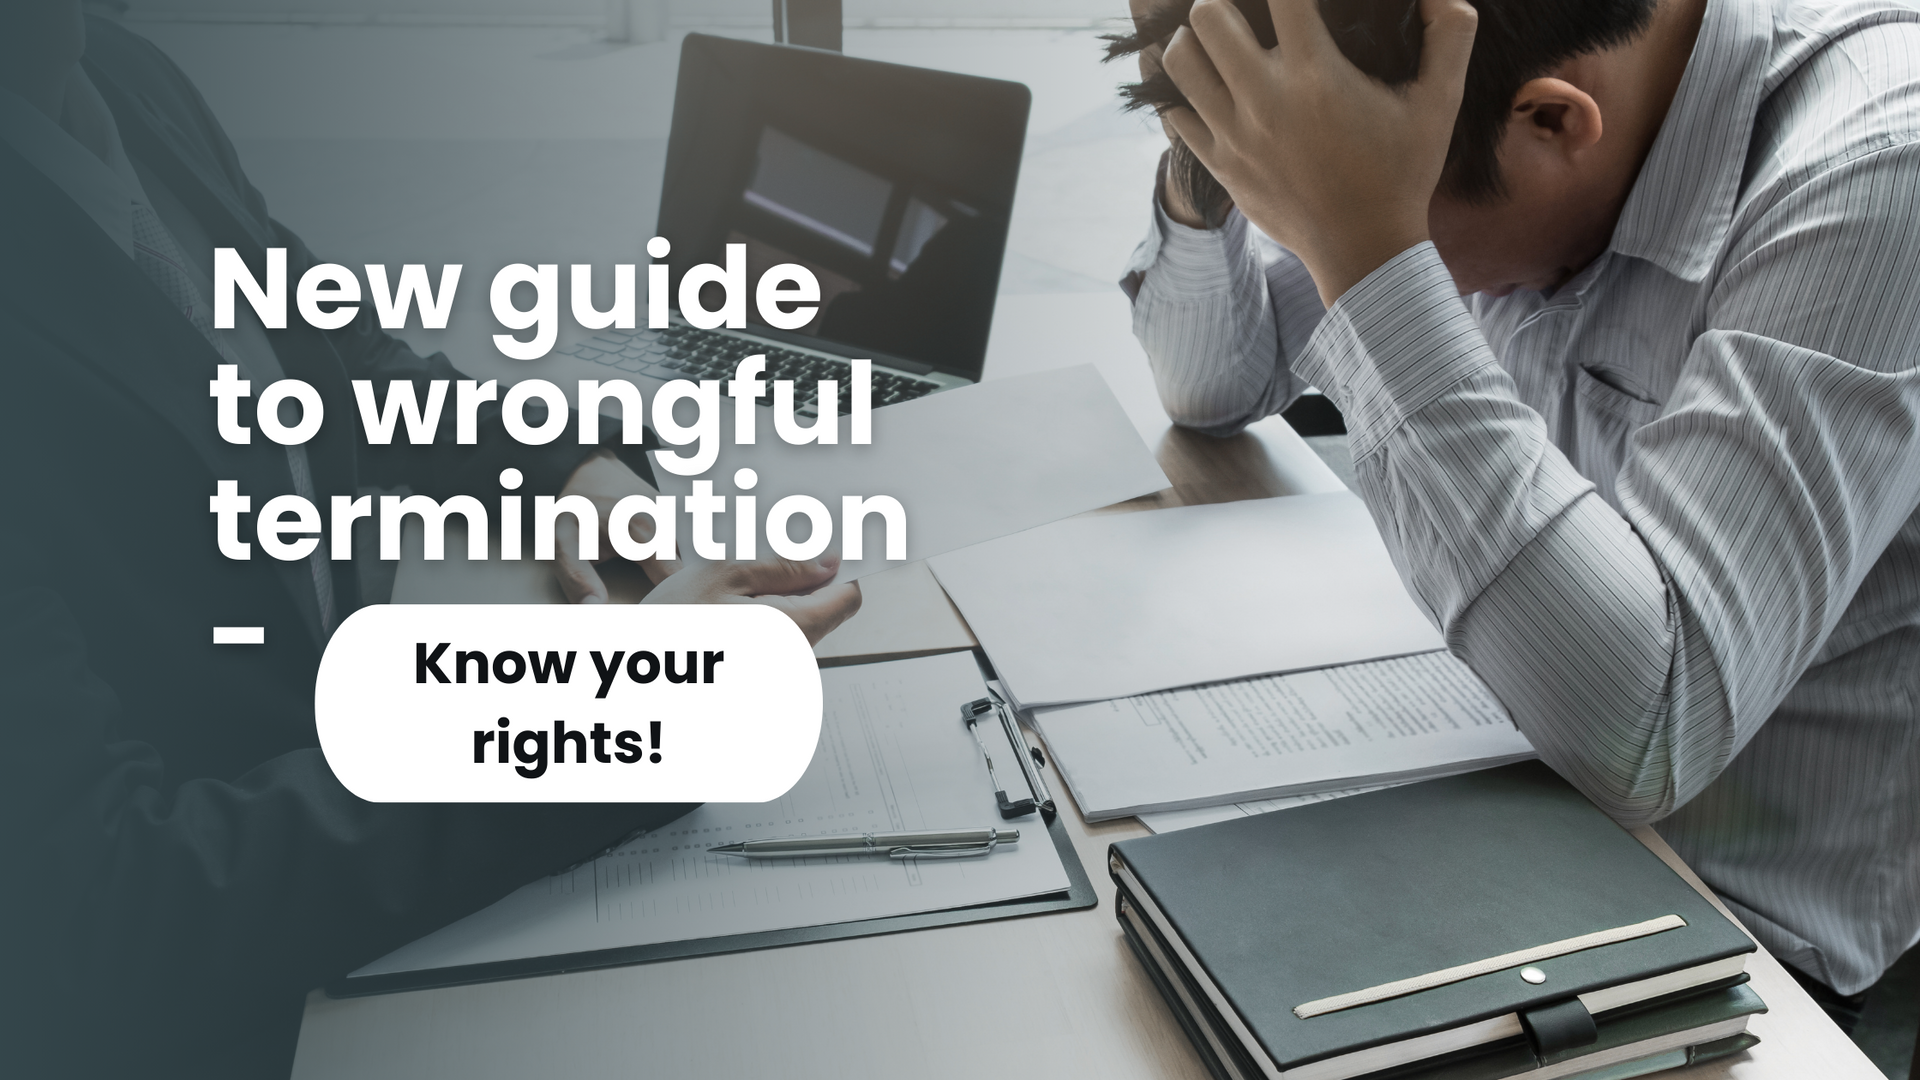 New guide to wrongful termination - Know your rights